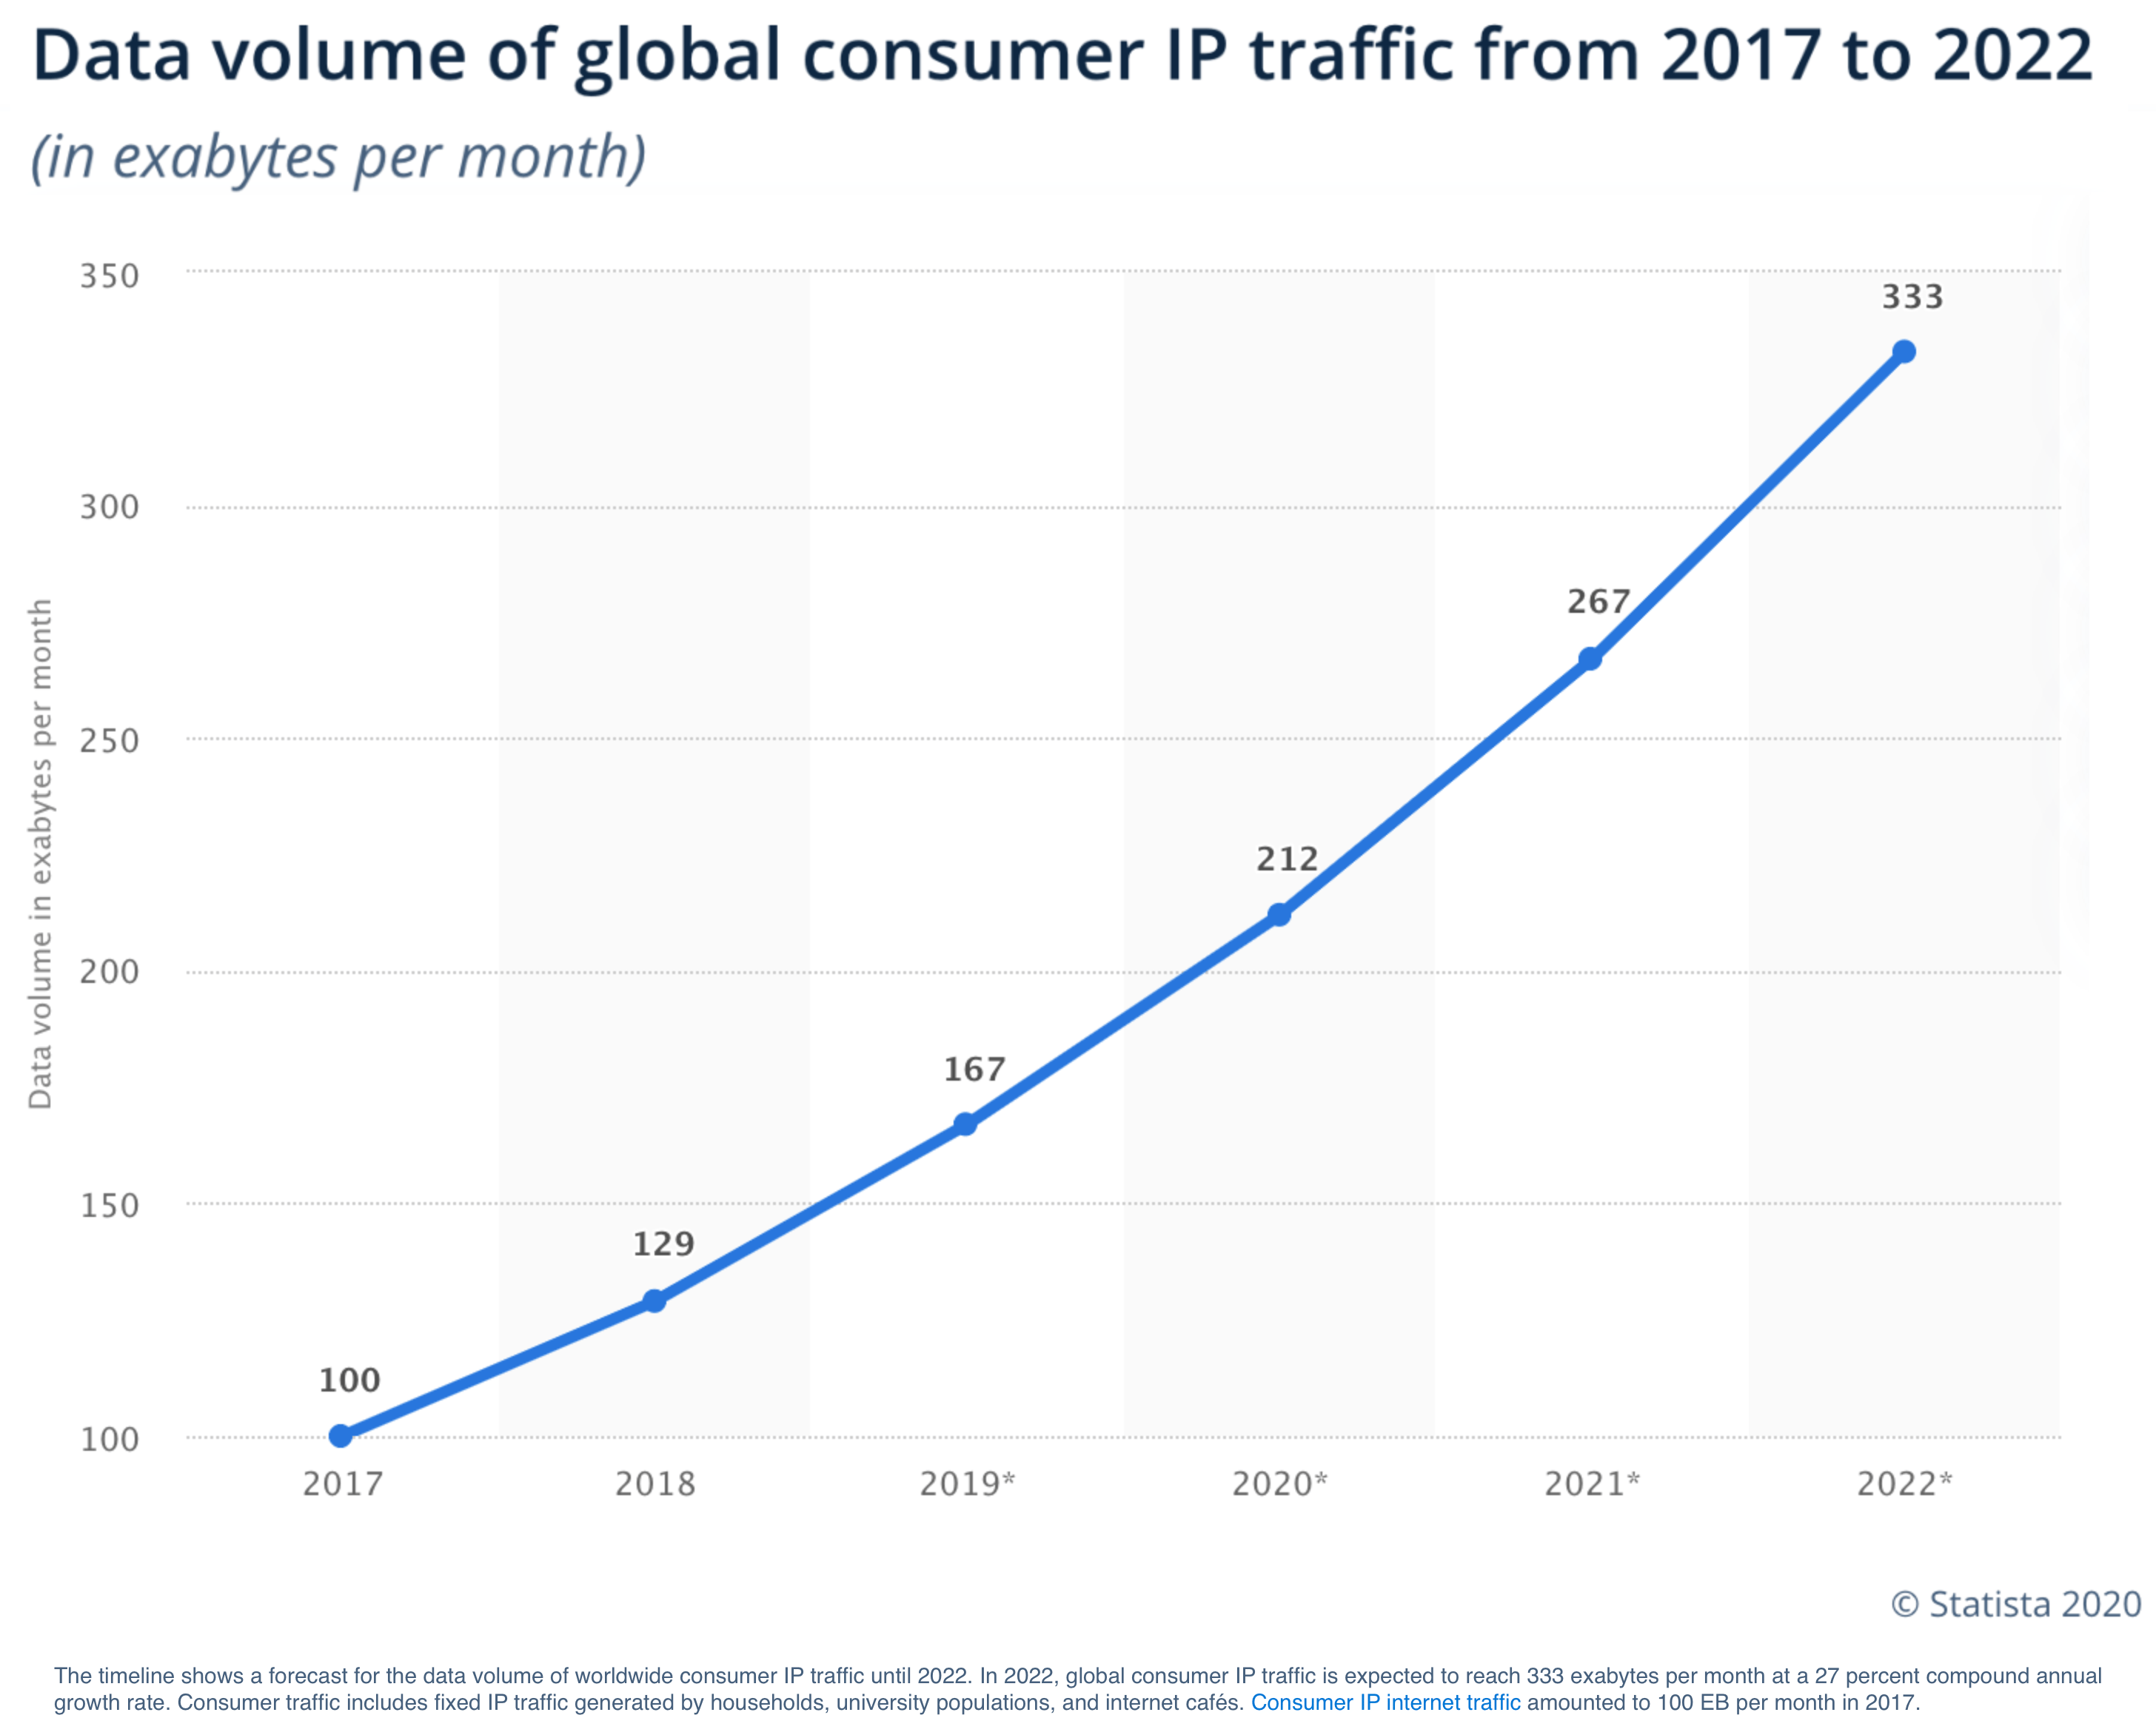 Data volume of global consumer IP traffic from 2017 to 2022